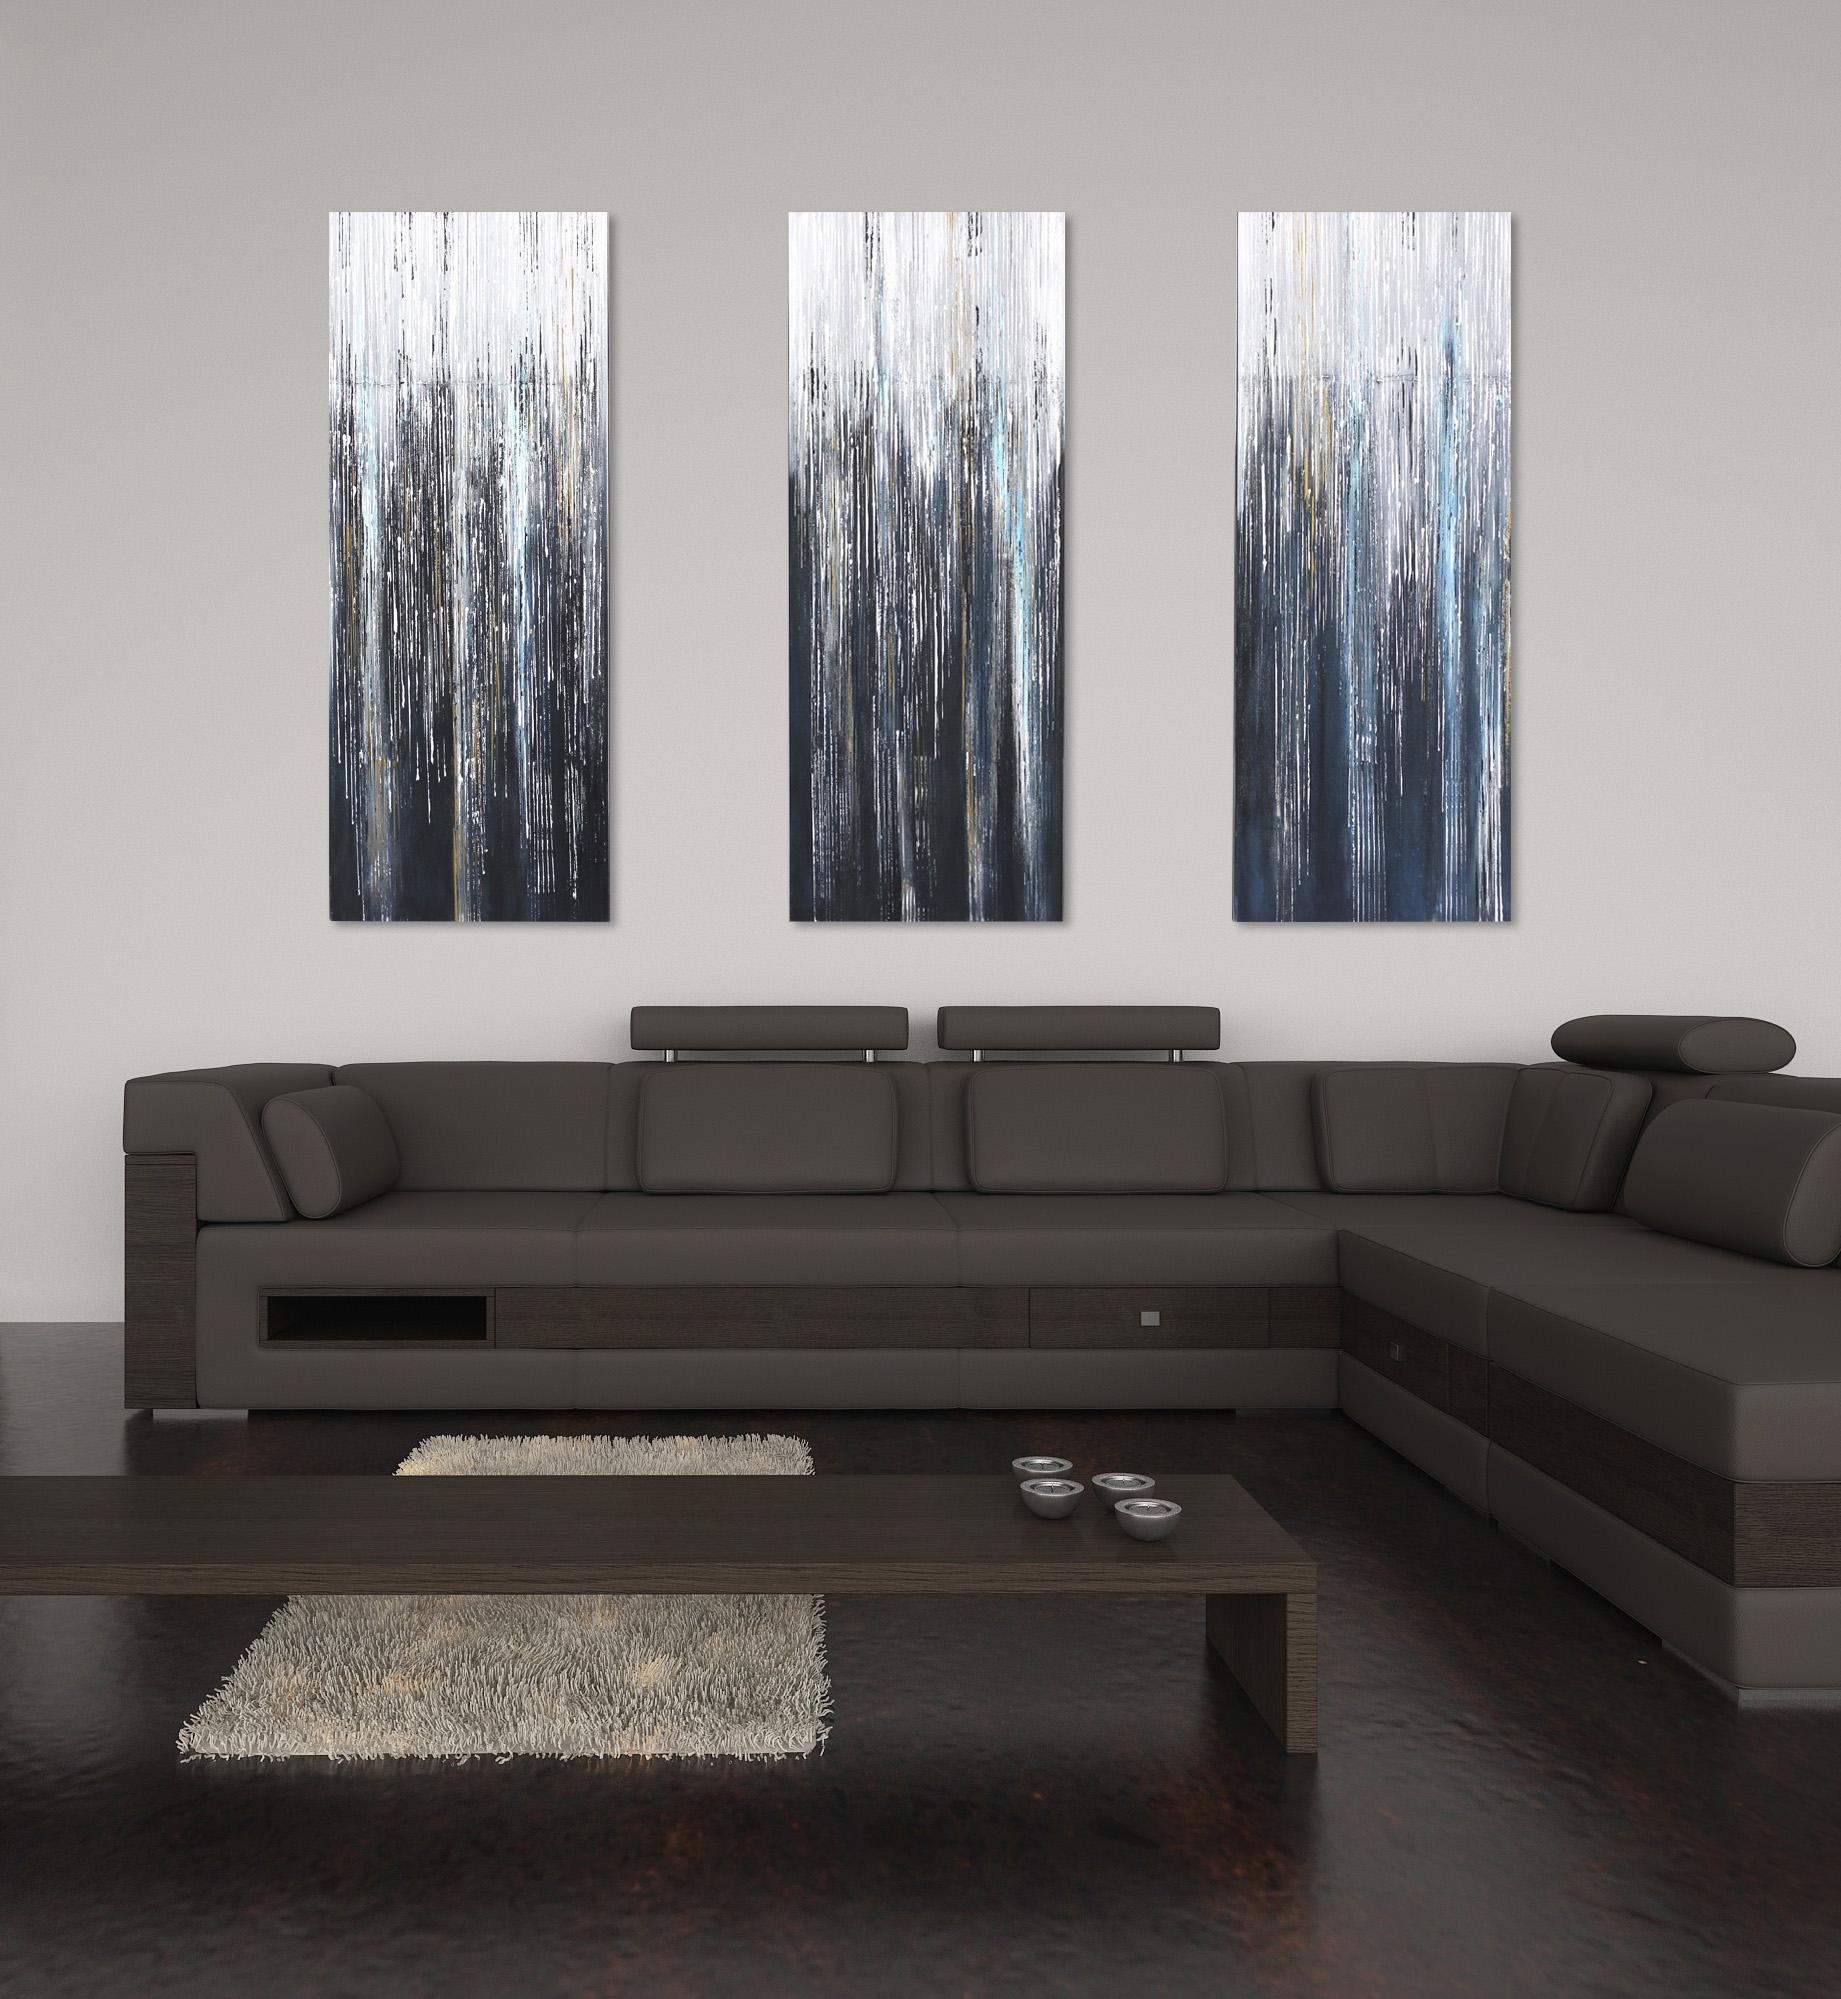 Ocean (triptych) - Gray Landscape Painting by Ivana Milosevic